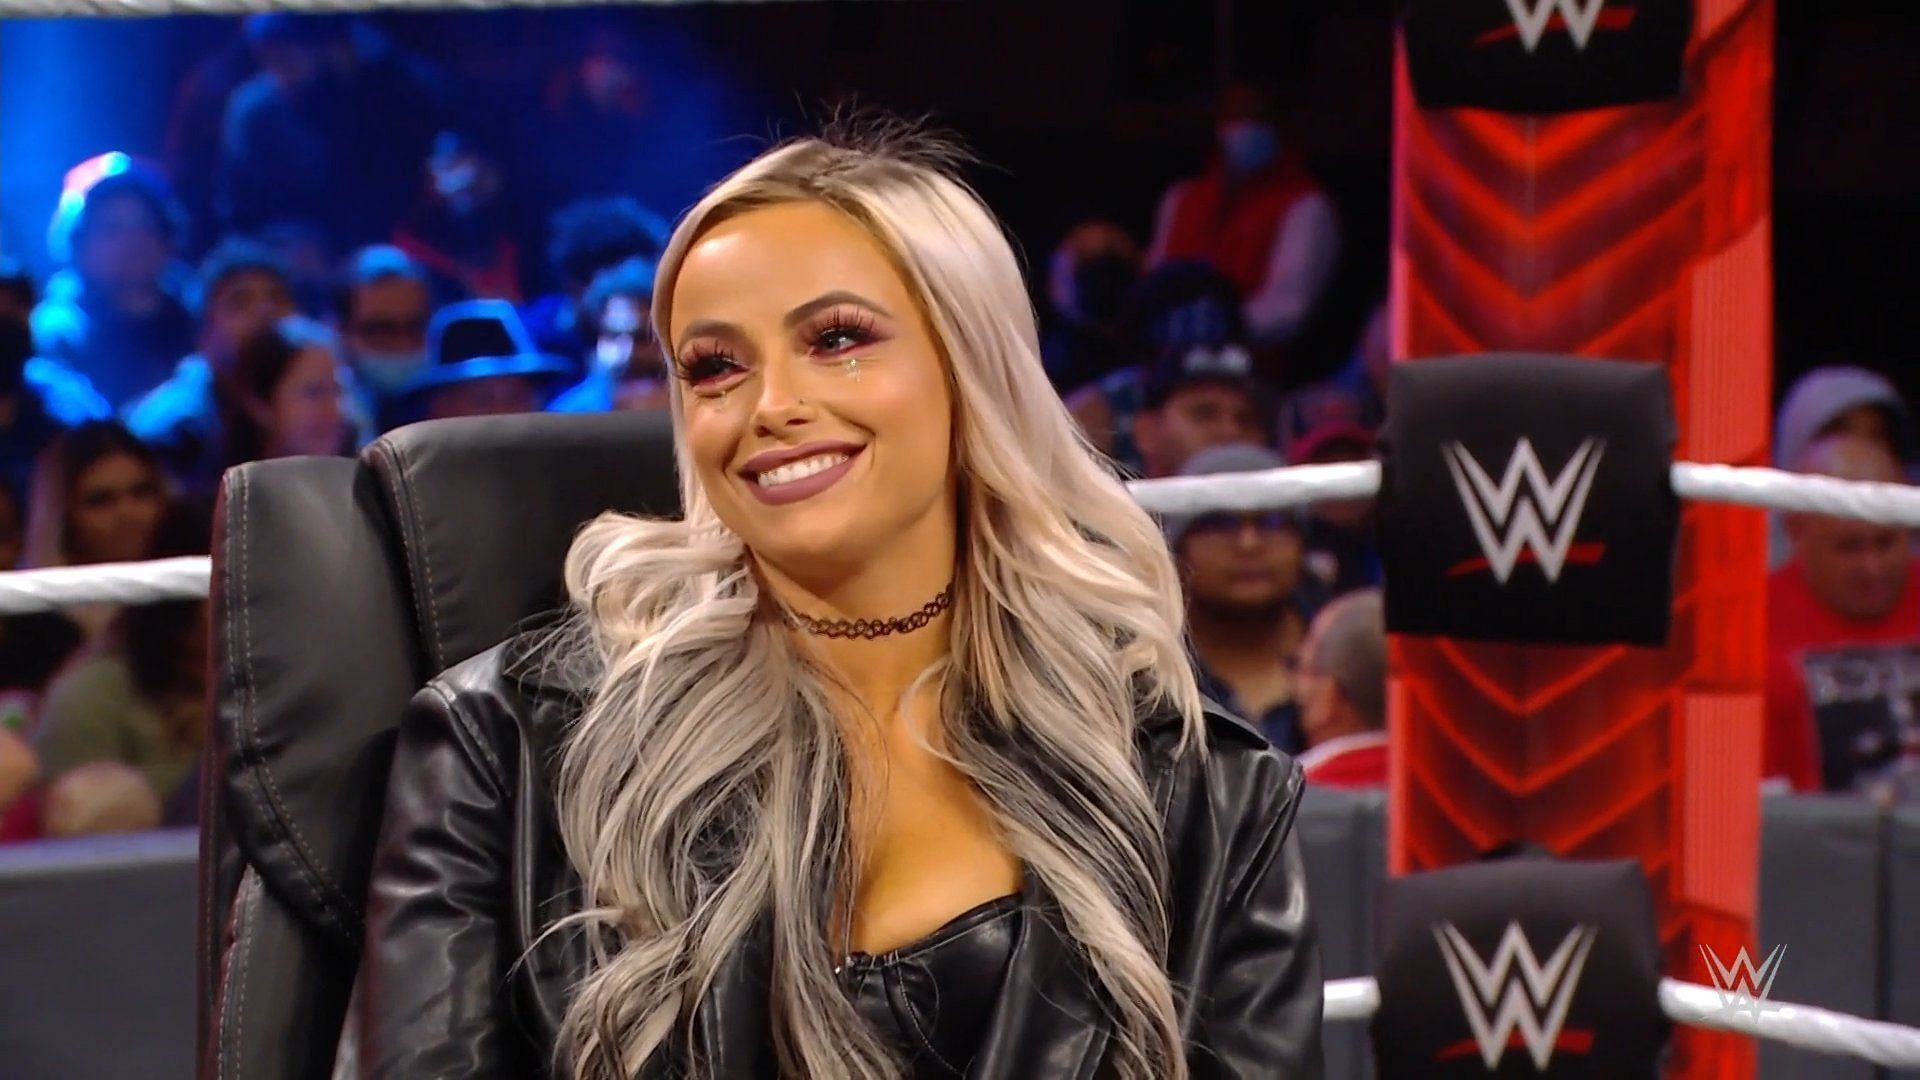 <div></noscript>WWE's Liv Morgan grants 'wish' ahead of Championship match on RAW, makes big promise to special fan</div>